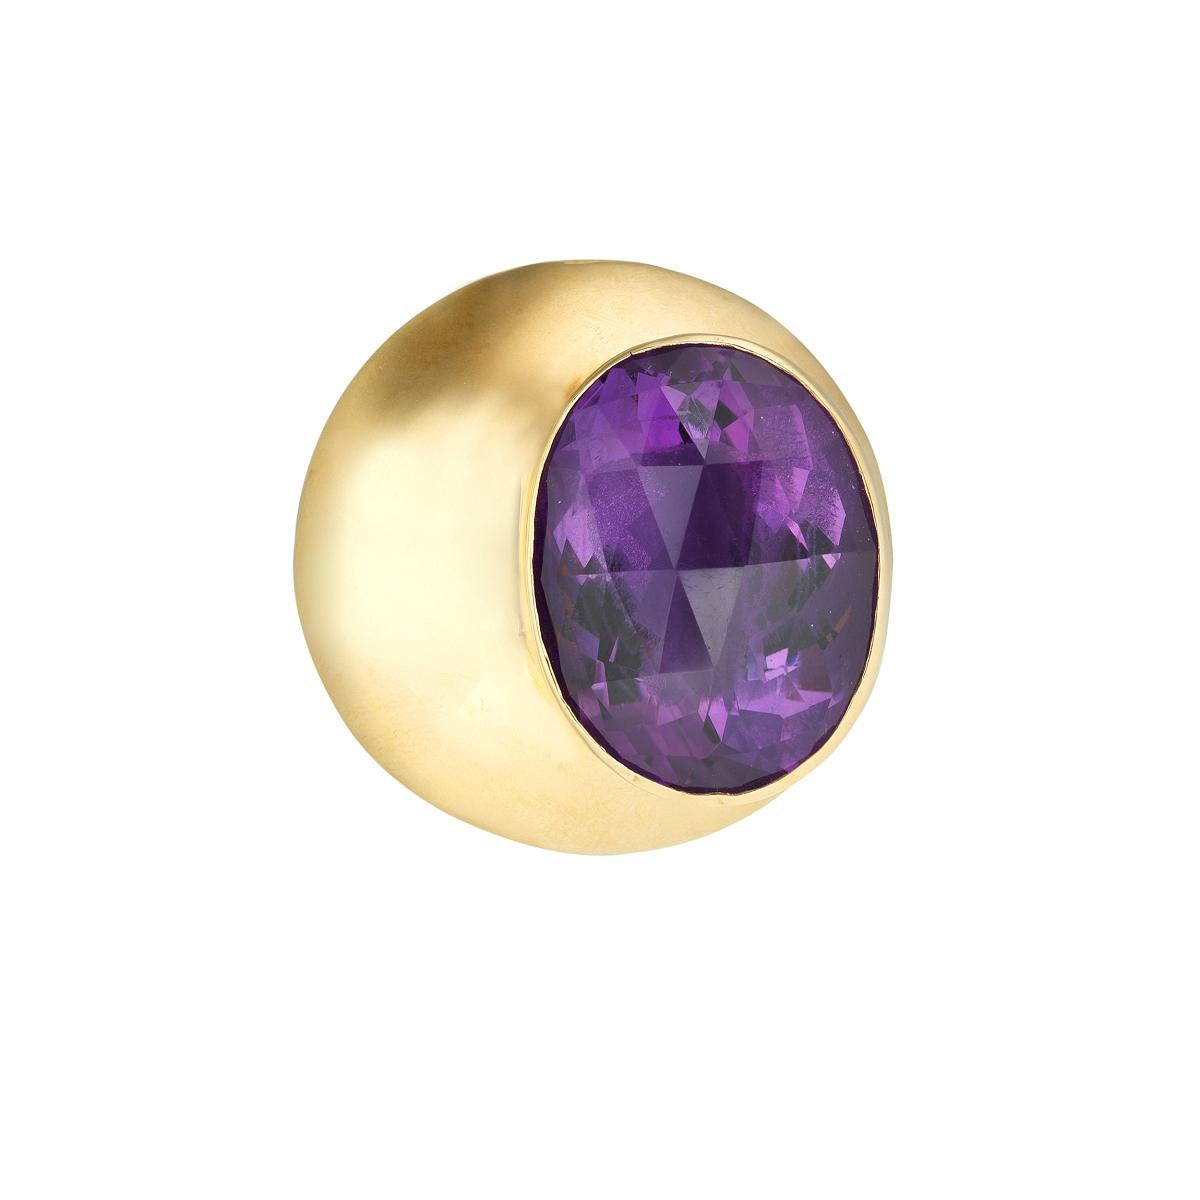 Jean Vendome design is inimitable.
Important Amethyst oval on a yellow gold  Brooch.
French mark and marker's mark.
Circa 1970.

Diameter: 1.57 inch (4.00 centimeters).
Total weight: 27.29 grams.